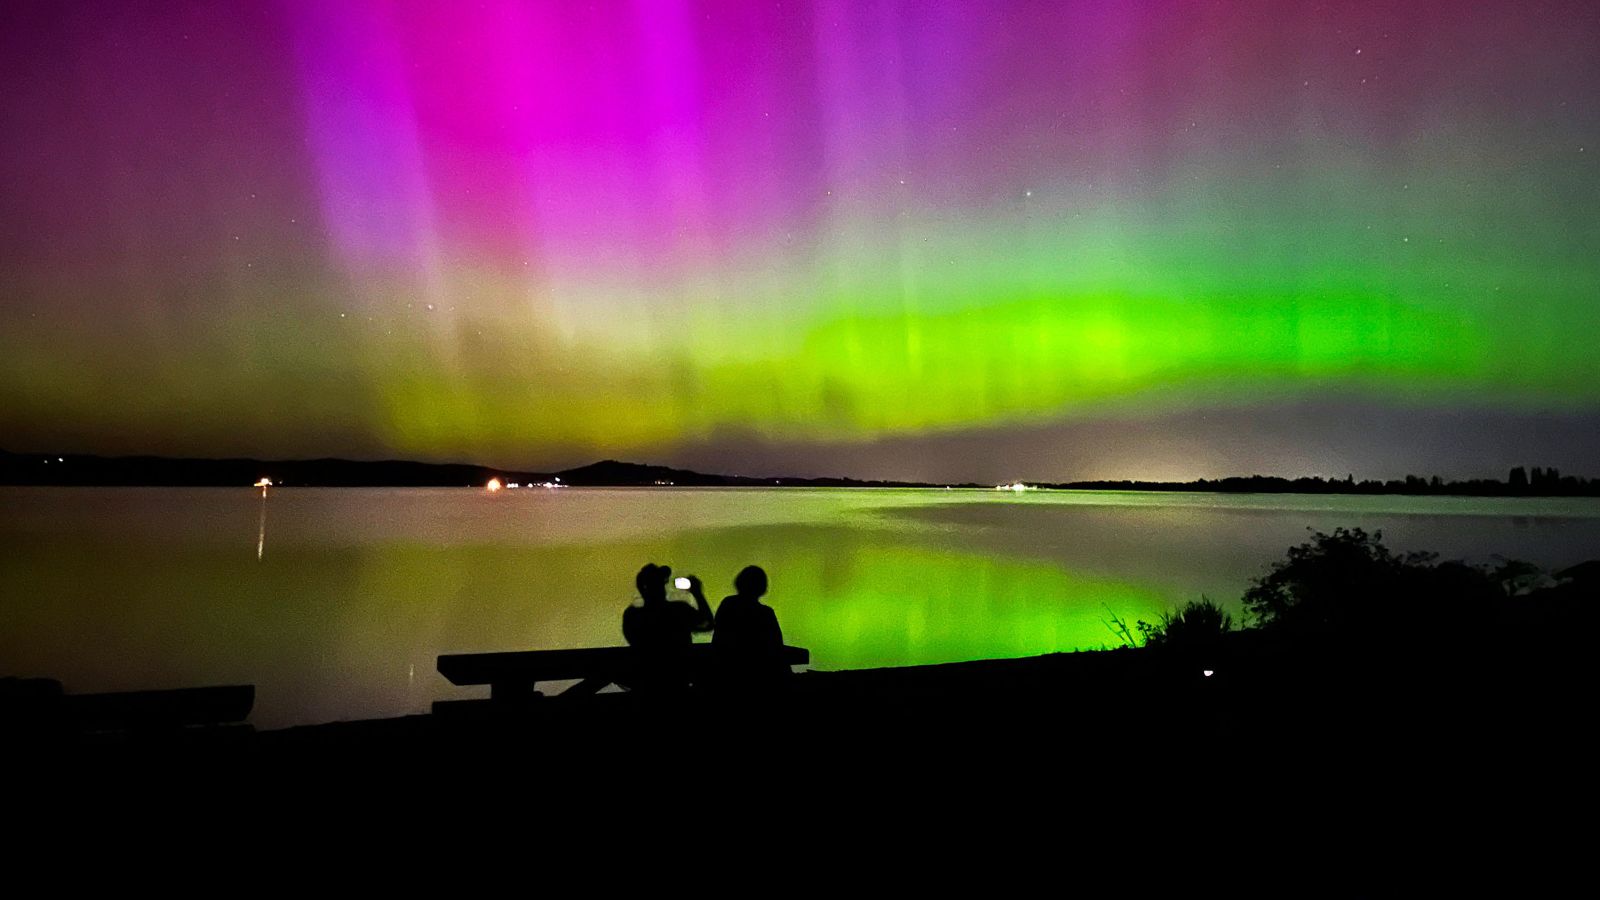 Did you miss the dazzling display of the Northern Lights?  You might get another chance this Saturday night